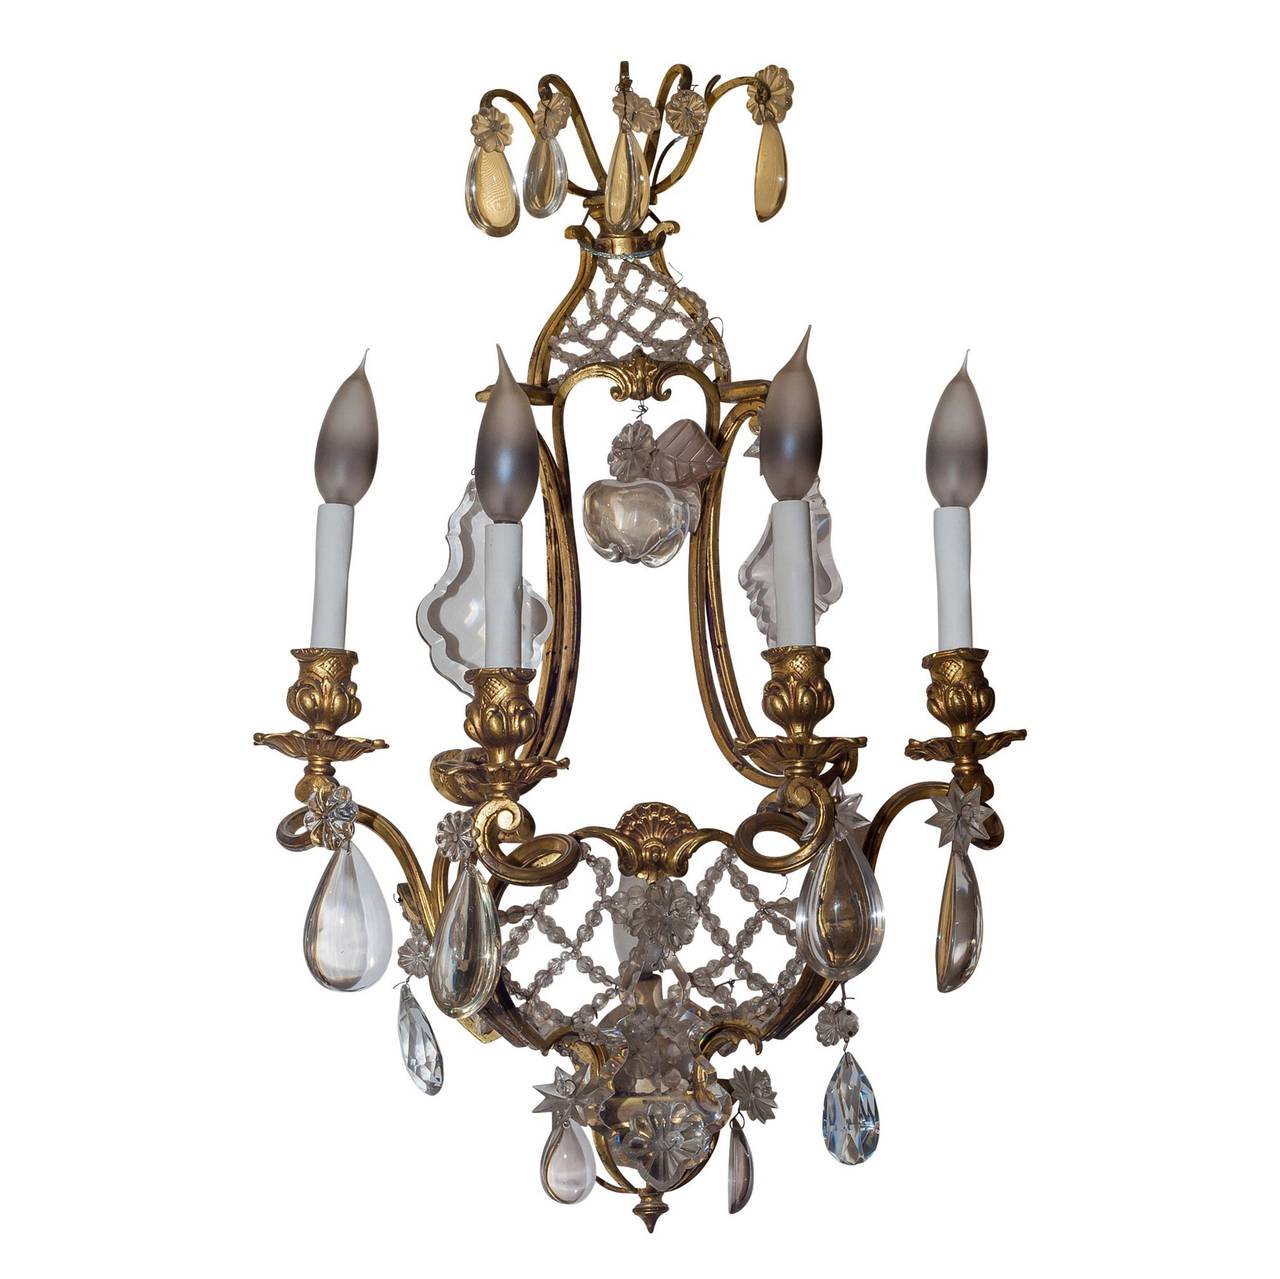 Pair of Bronze and Crystal Four-Arm Basket form Wall Light Sconces
Stock Number: L280